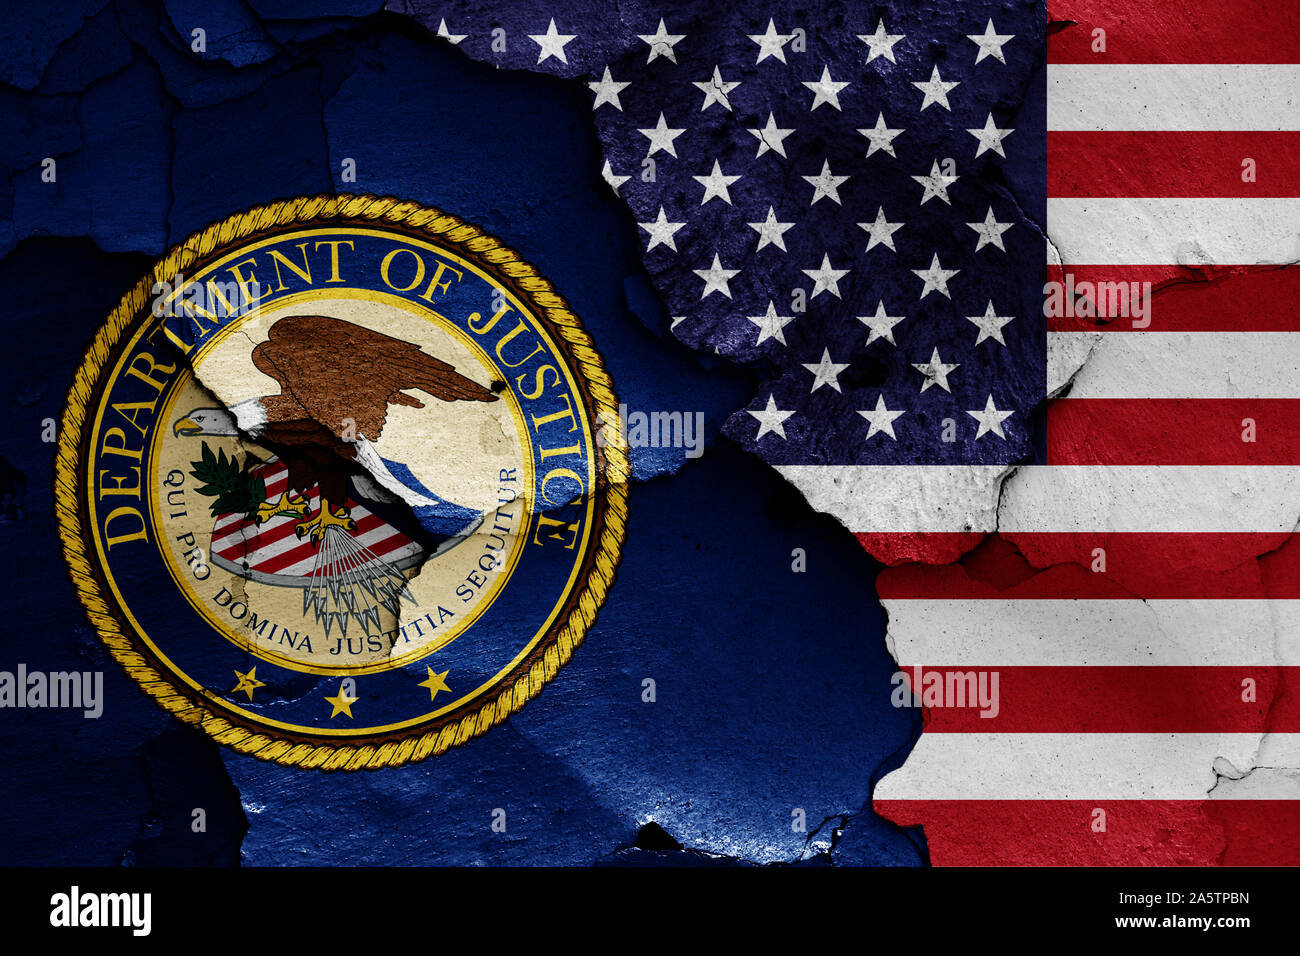 flags of Department of Justice and USA painted on cracked wall Stock Photo